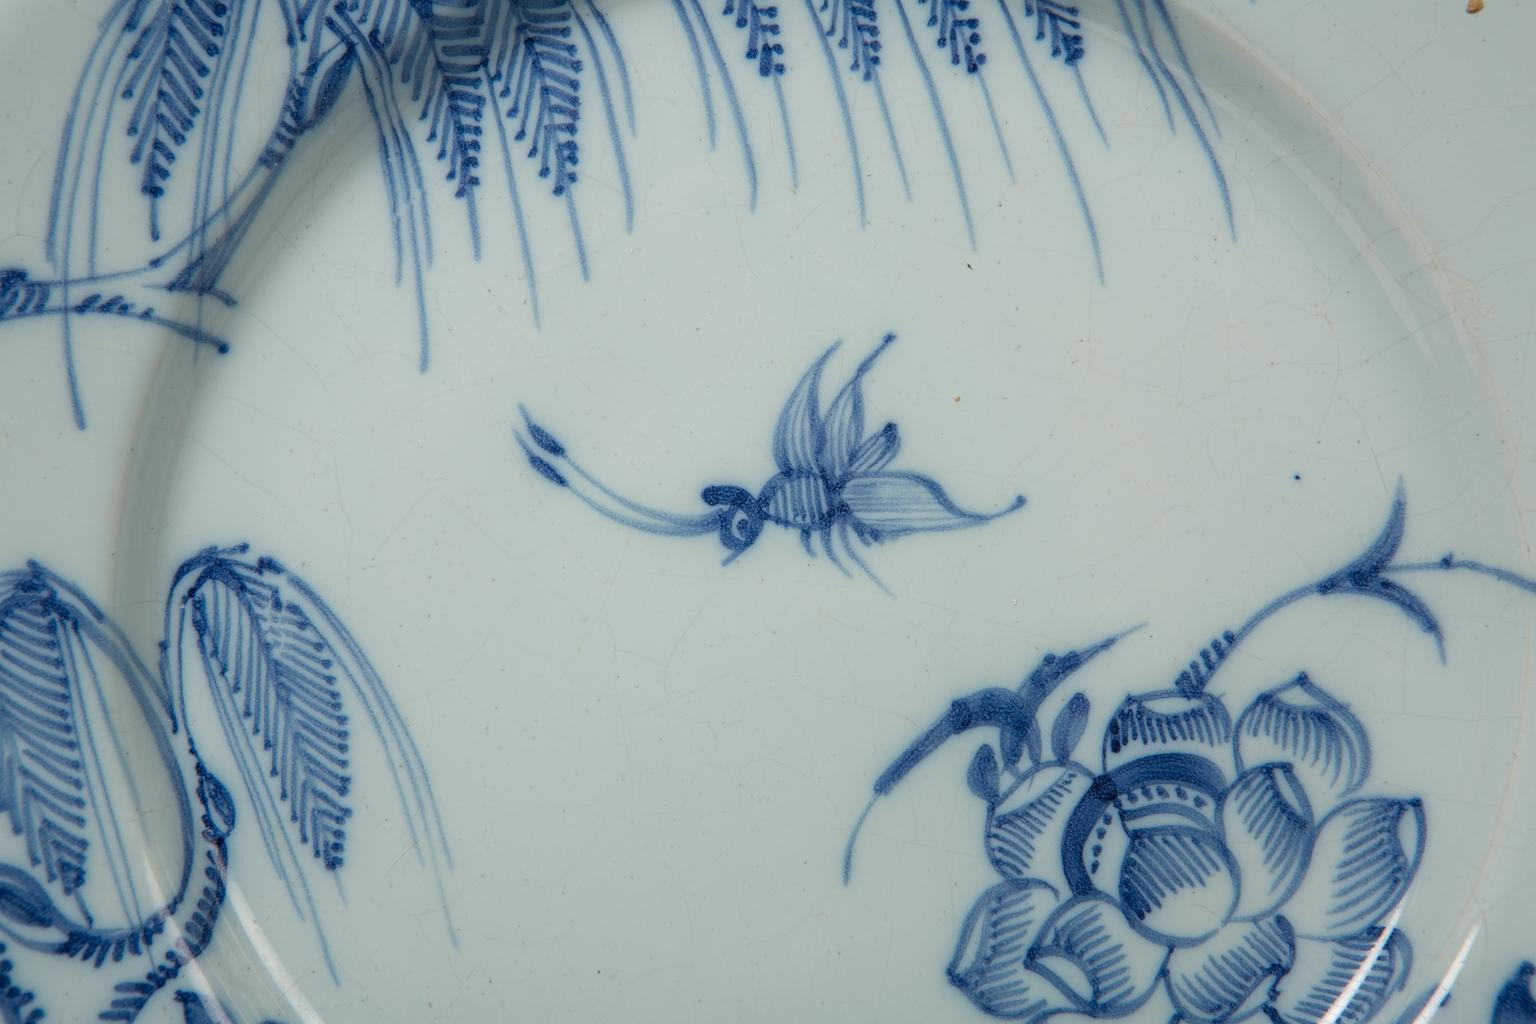 Antique Blue and White Delft Plates a Set of Five 18th Century circa 1750 (Chinoiserie)